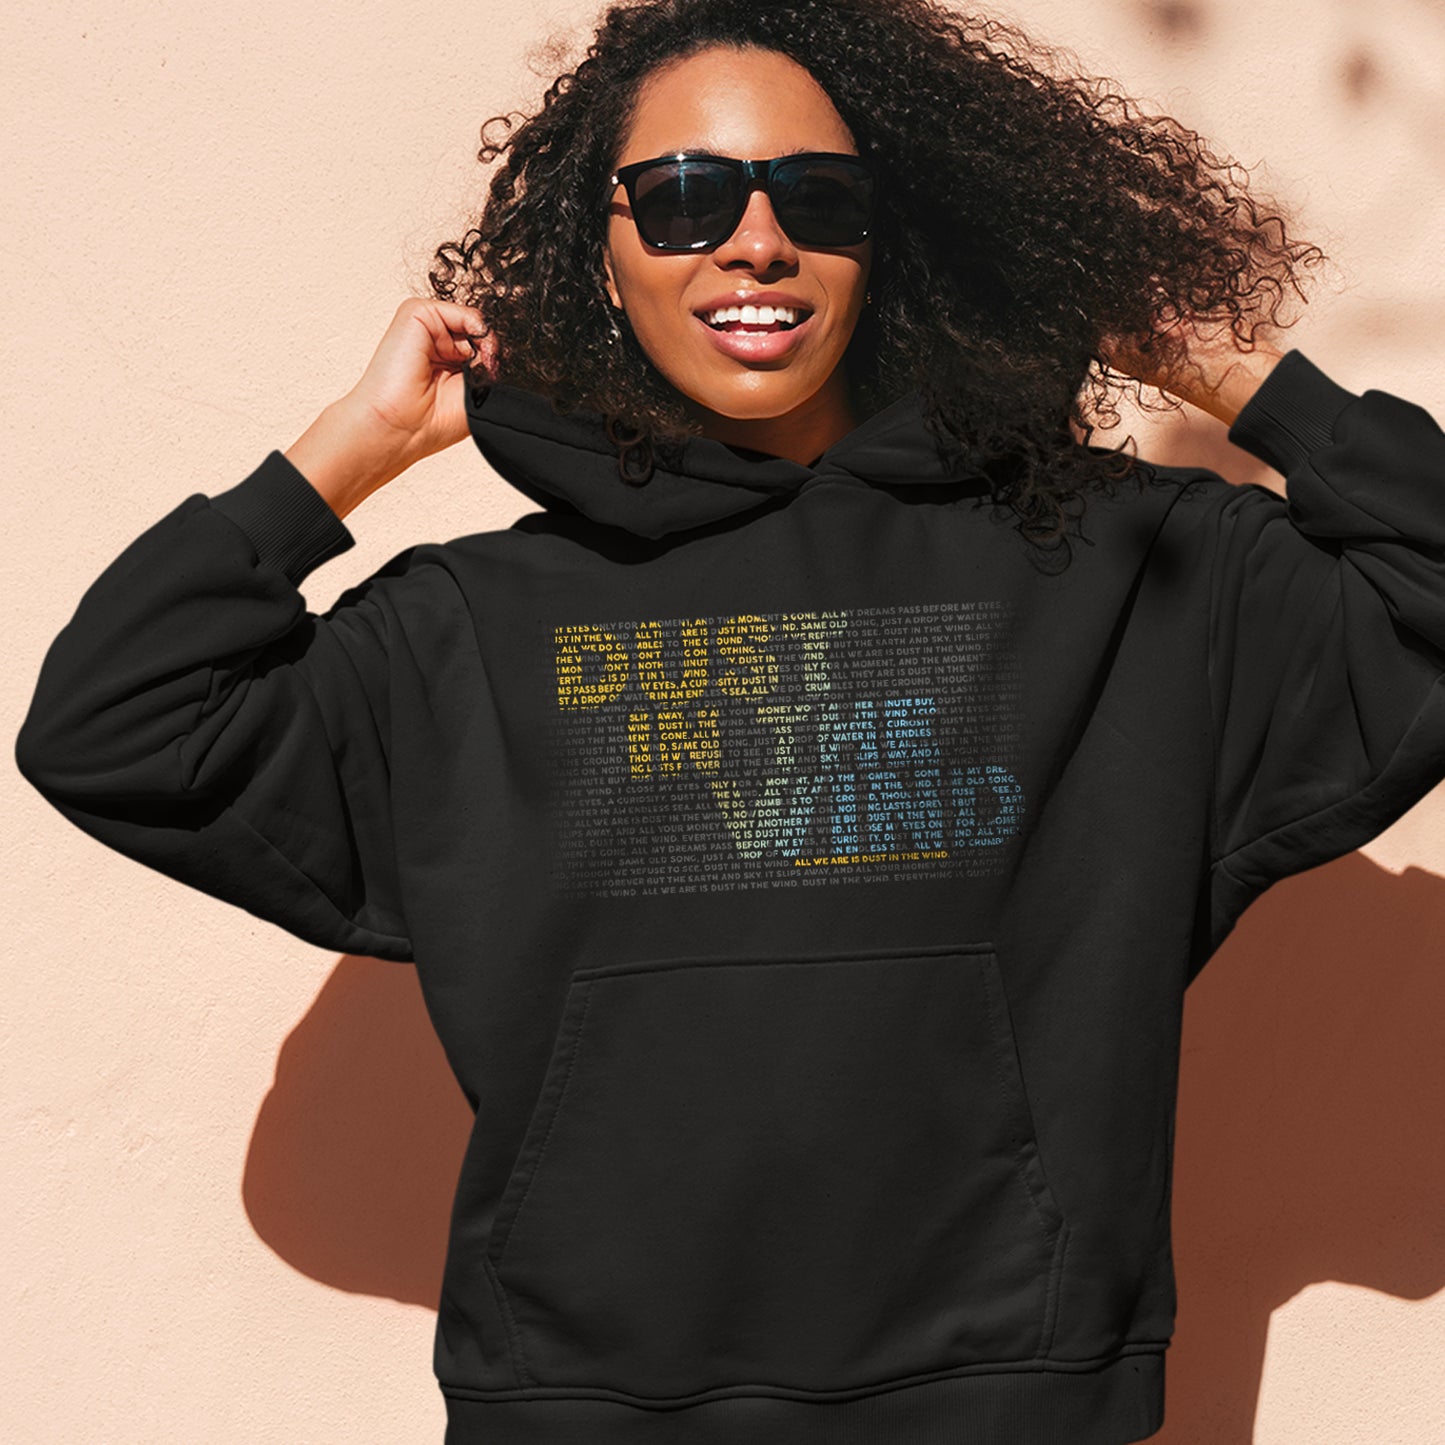 A female model wearing a black hoodie standing in front of a peach-colored wall. On the front of the hoodie is text saying "dust in the wind." The text is comprised of smaller text, colored yellow and blue, to form the dust in the wind phrase. 